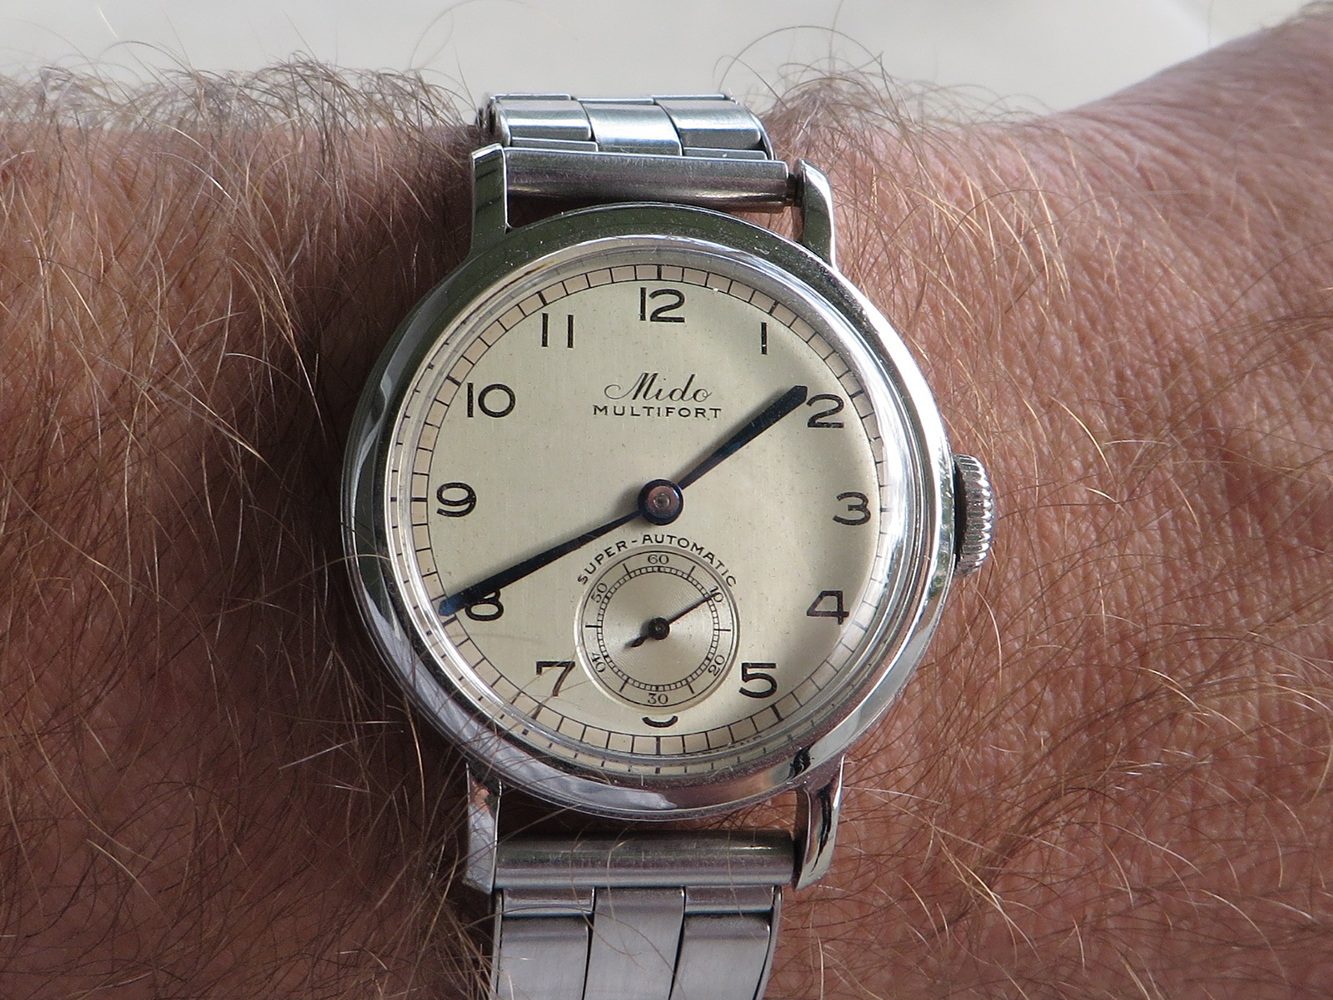 Vintage Mido Watch | vlr.eng.br